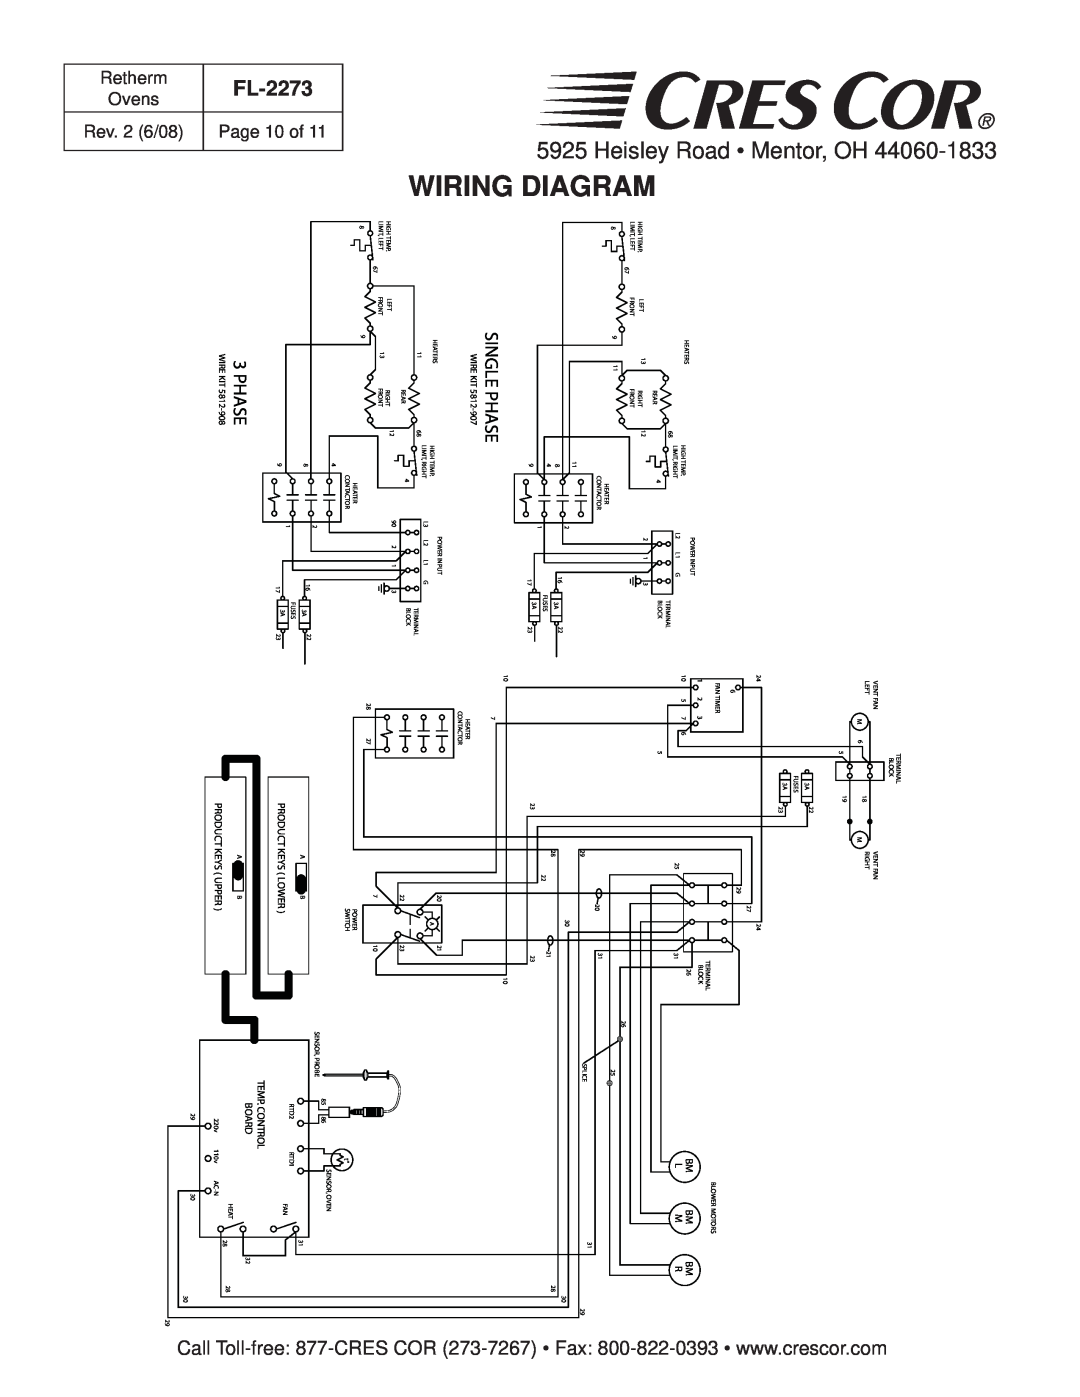 Cres Cor RR-1332 Diagram, Heisley Road Mentor, OH, FL-2273, 273-7267, Call Toll-free 877-CRES COR, Phase, Wiring, Board 